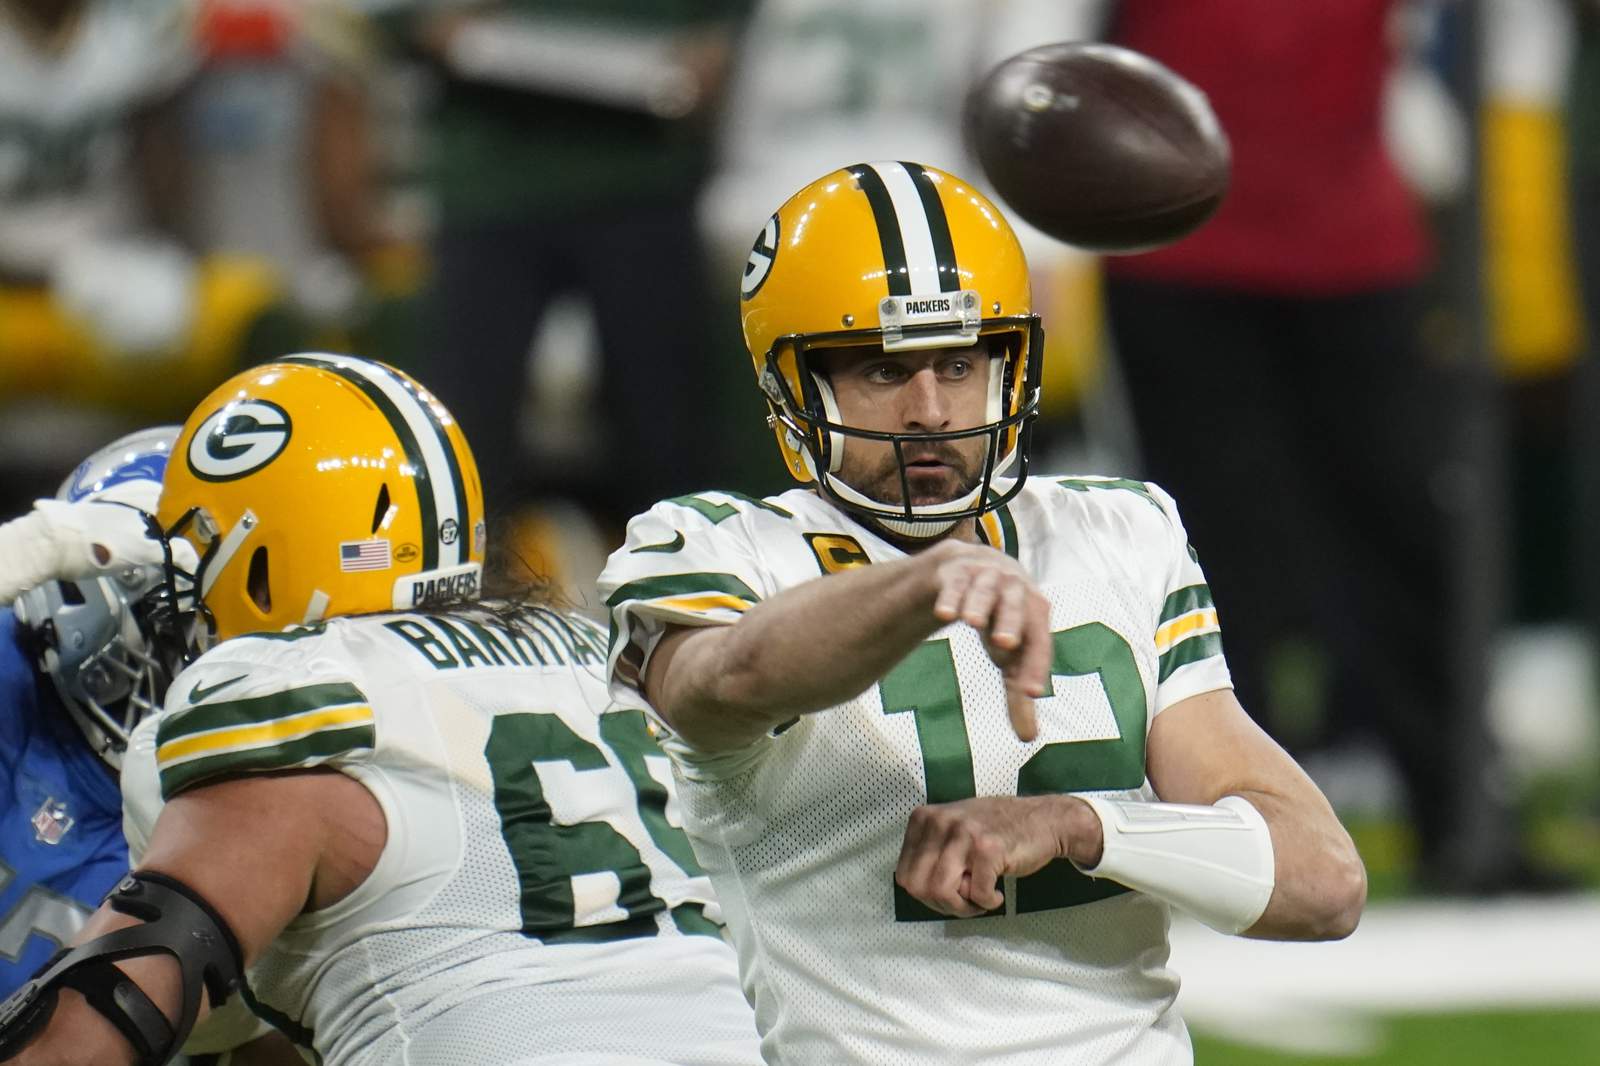 Rodgers-led Packers beat Lions 31-24, clinch NFC North title